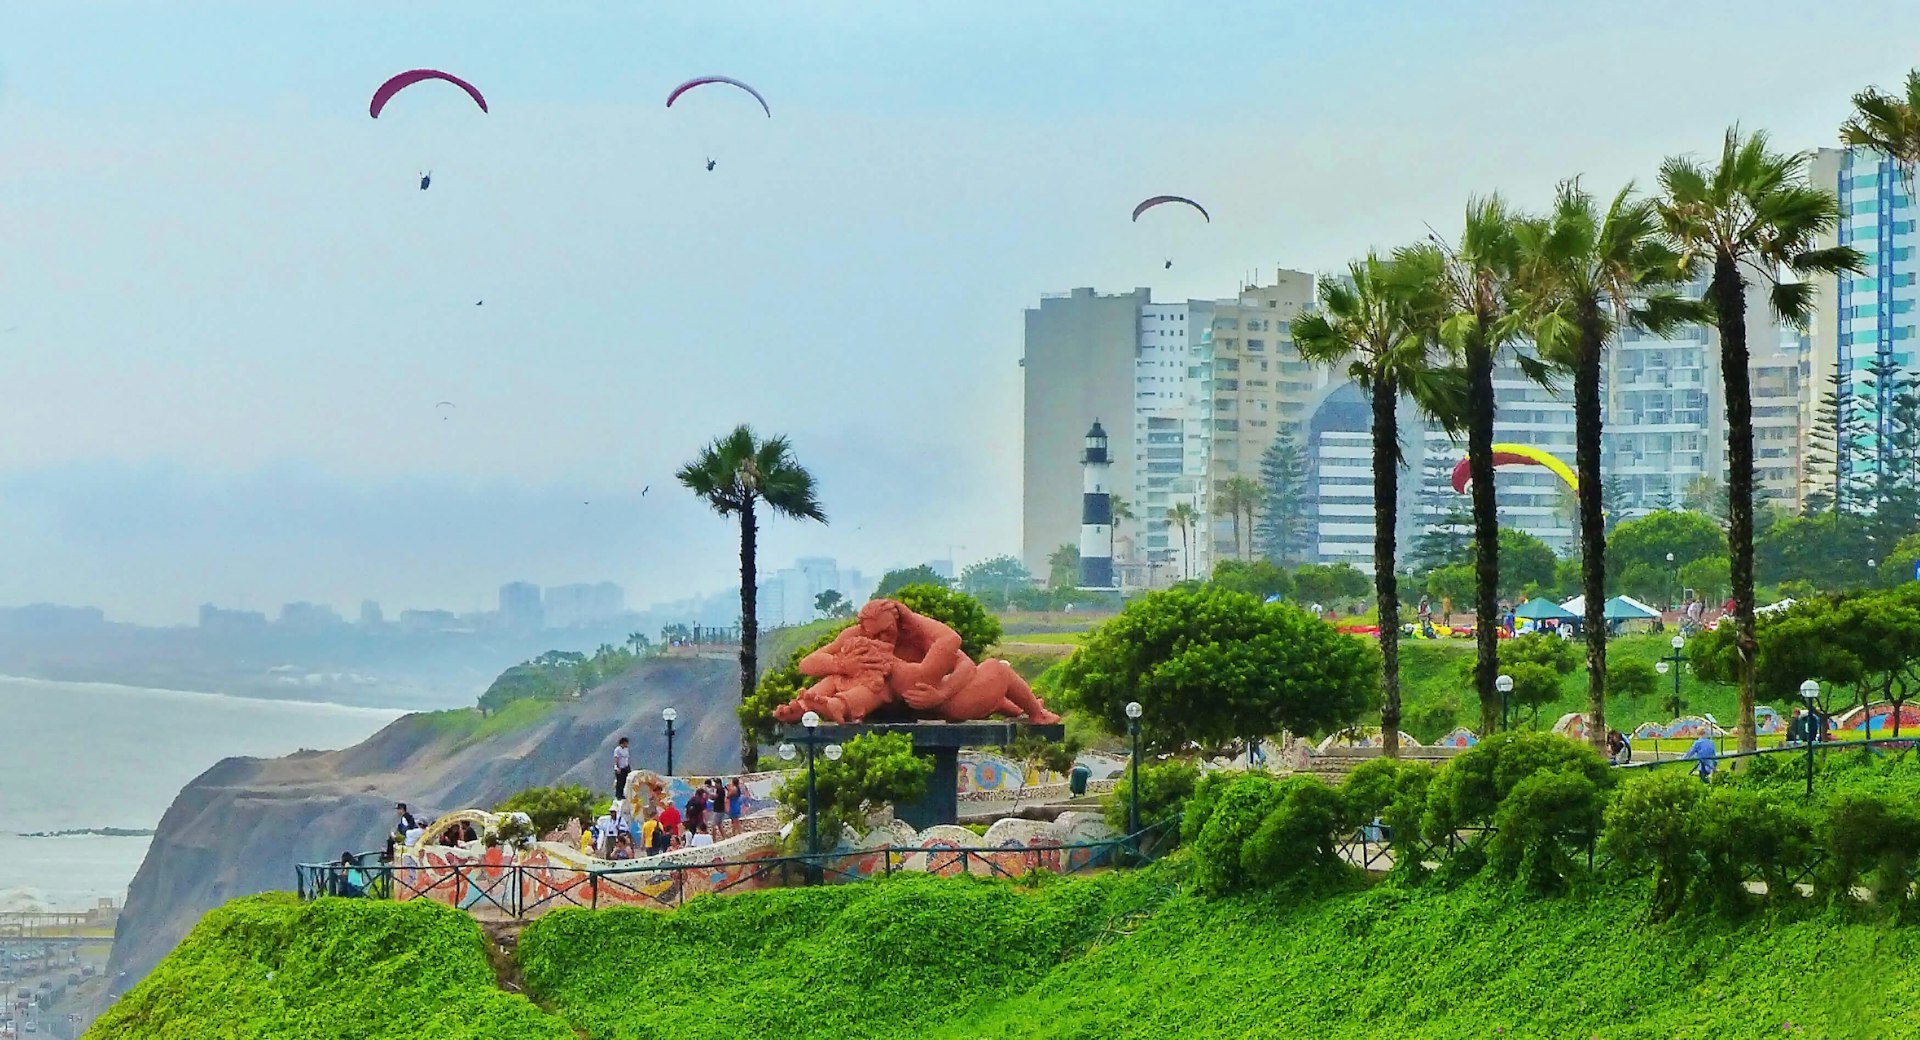 View of paragliders over the Park of Love and tourists mingling by the El Beso sculpture